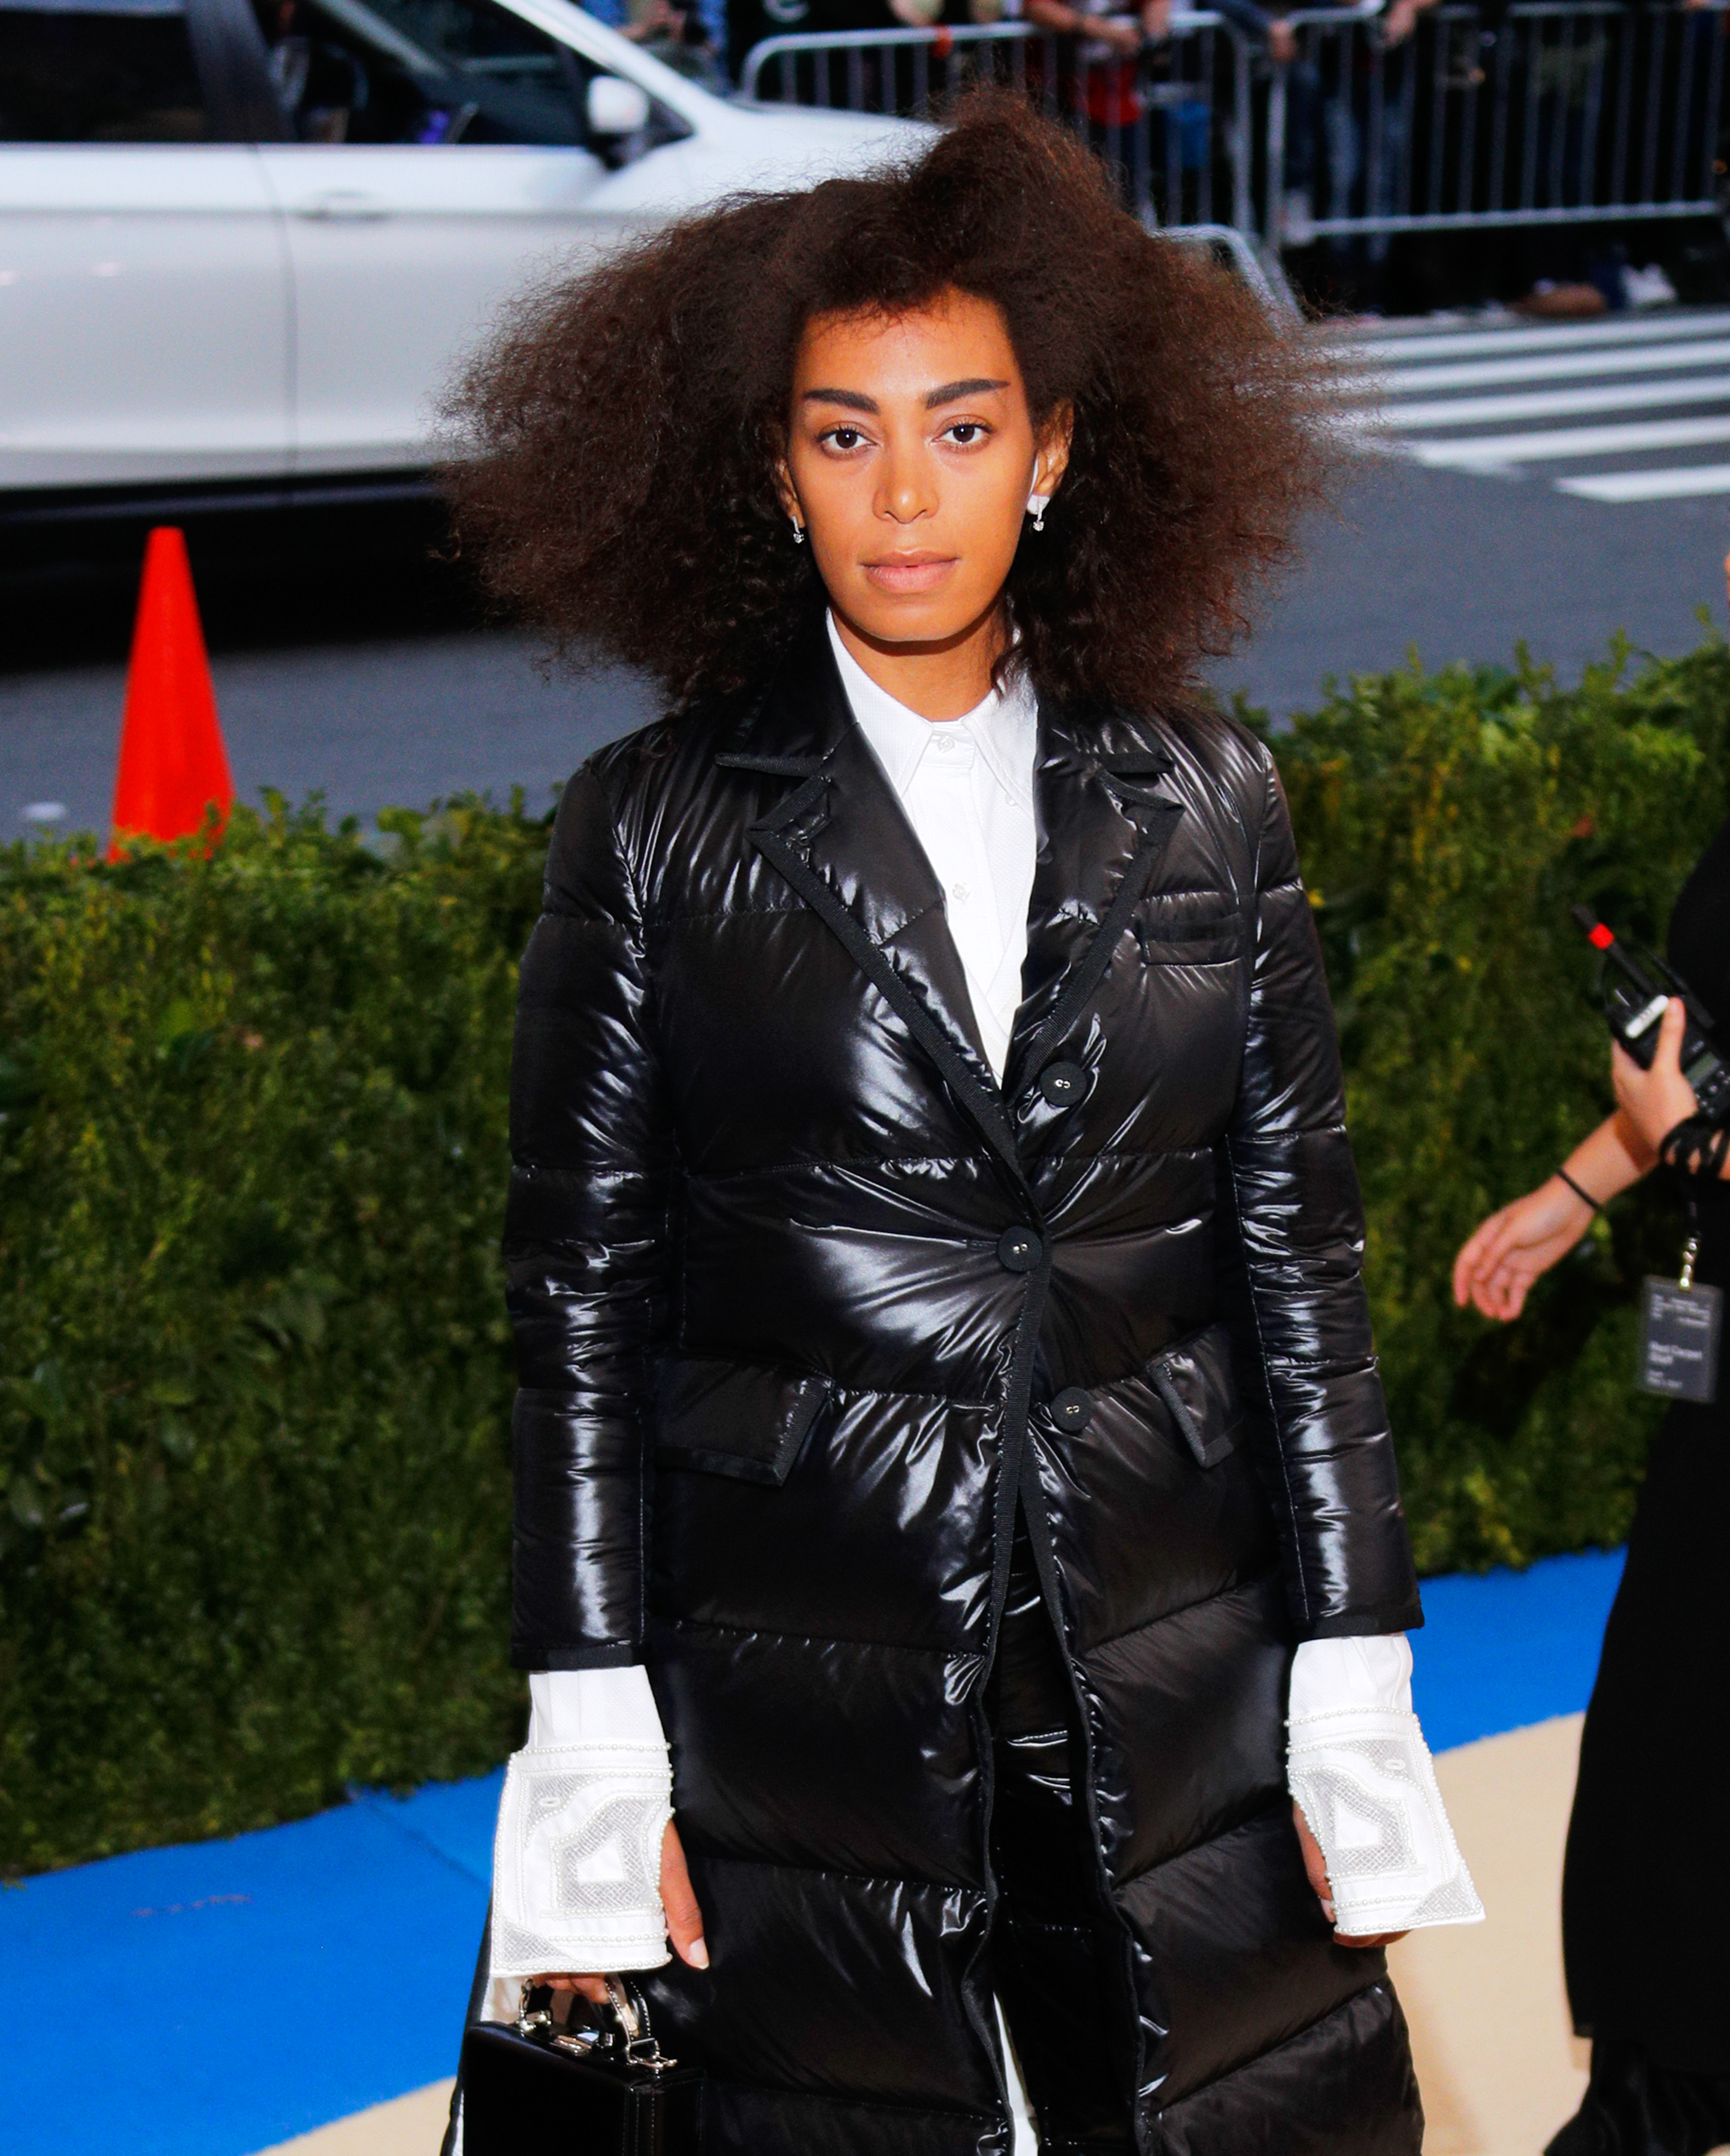 Solange Knowles at 'Rei Kawakubo/Comme des Garçons:Art of the In-Between' Costume Institute Gala at Metropolitan Museum of Art on May 1, 2017 in New York City.  (Photo by Jackson Lee/Getty Images) (Jackson Lee&mdash;Jackson Lee/Filmmagic)